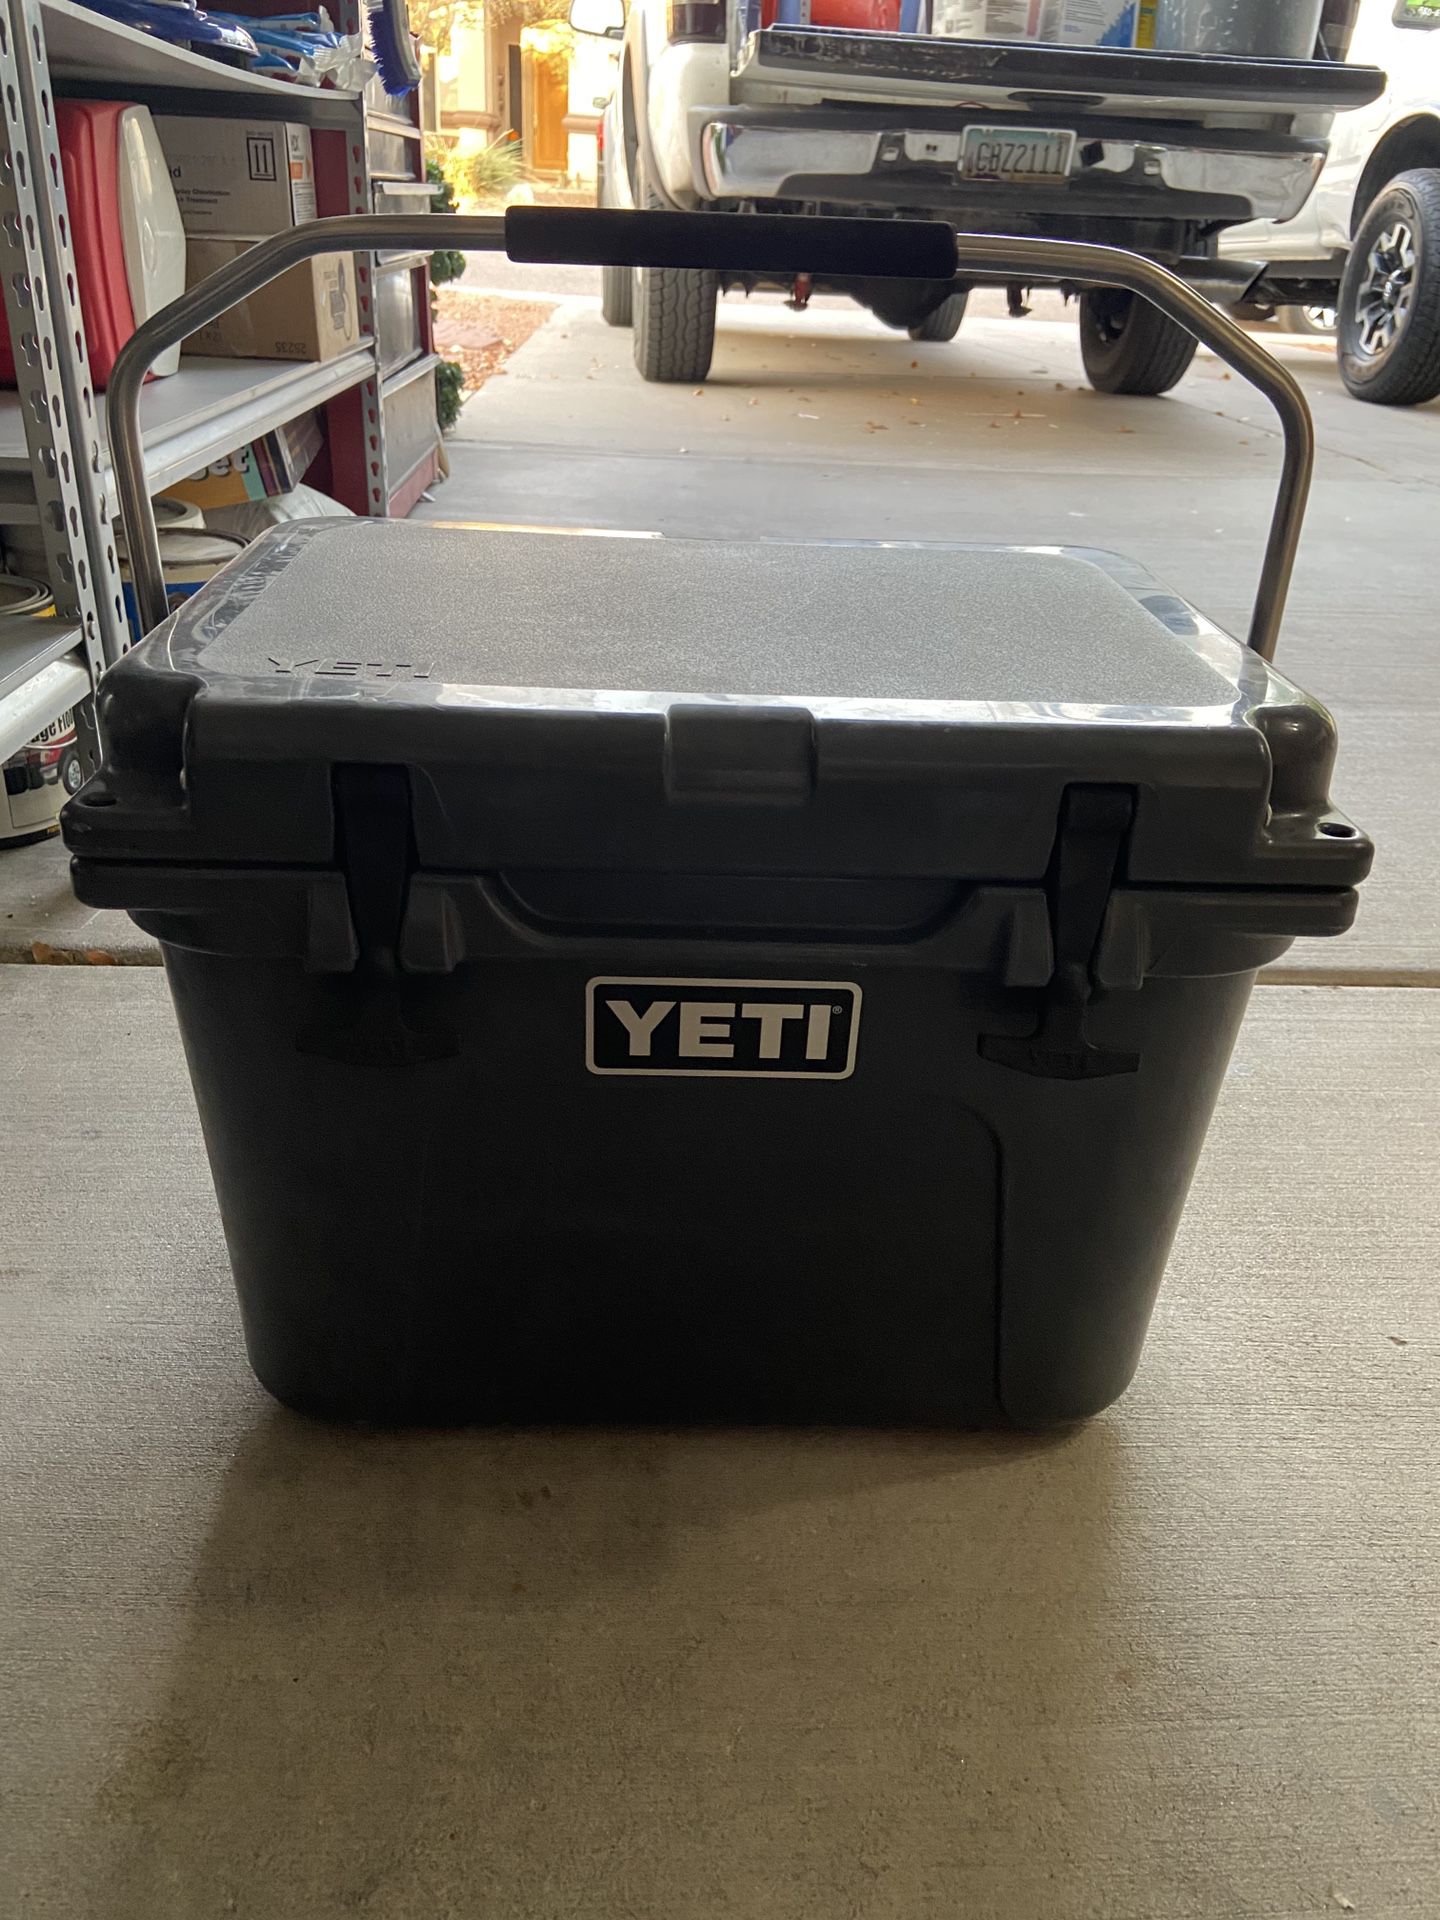 Yeti cooler THEY DONT MAKE ANYMORE!